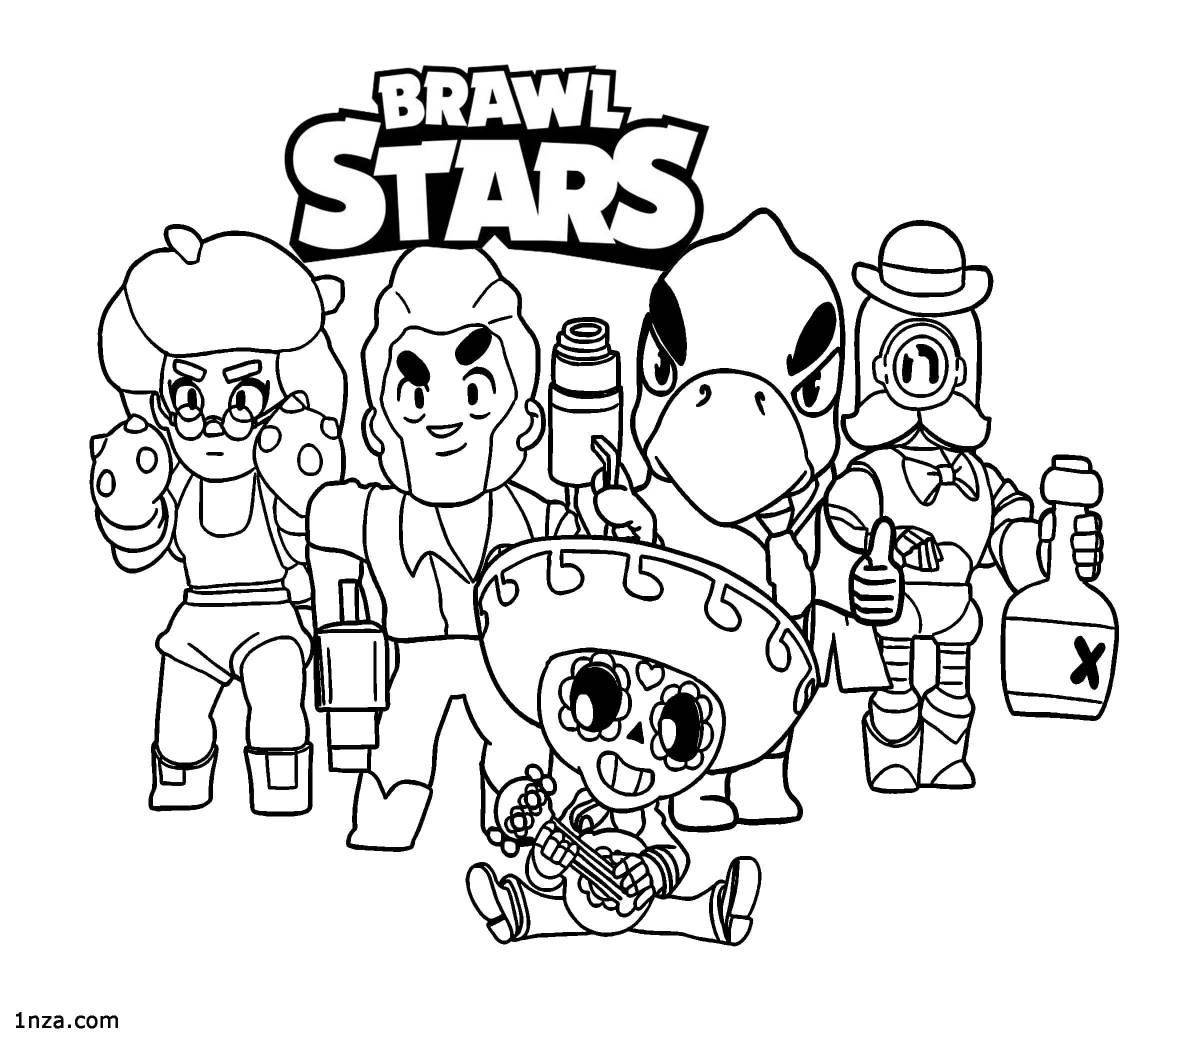 Sprout colorful coloring in brawl stars